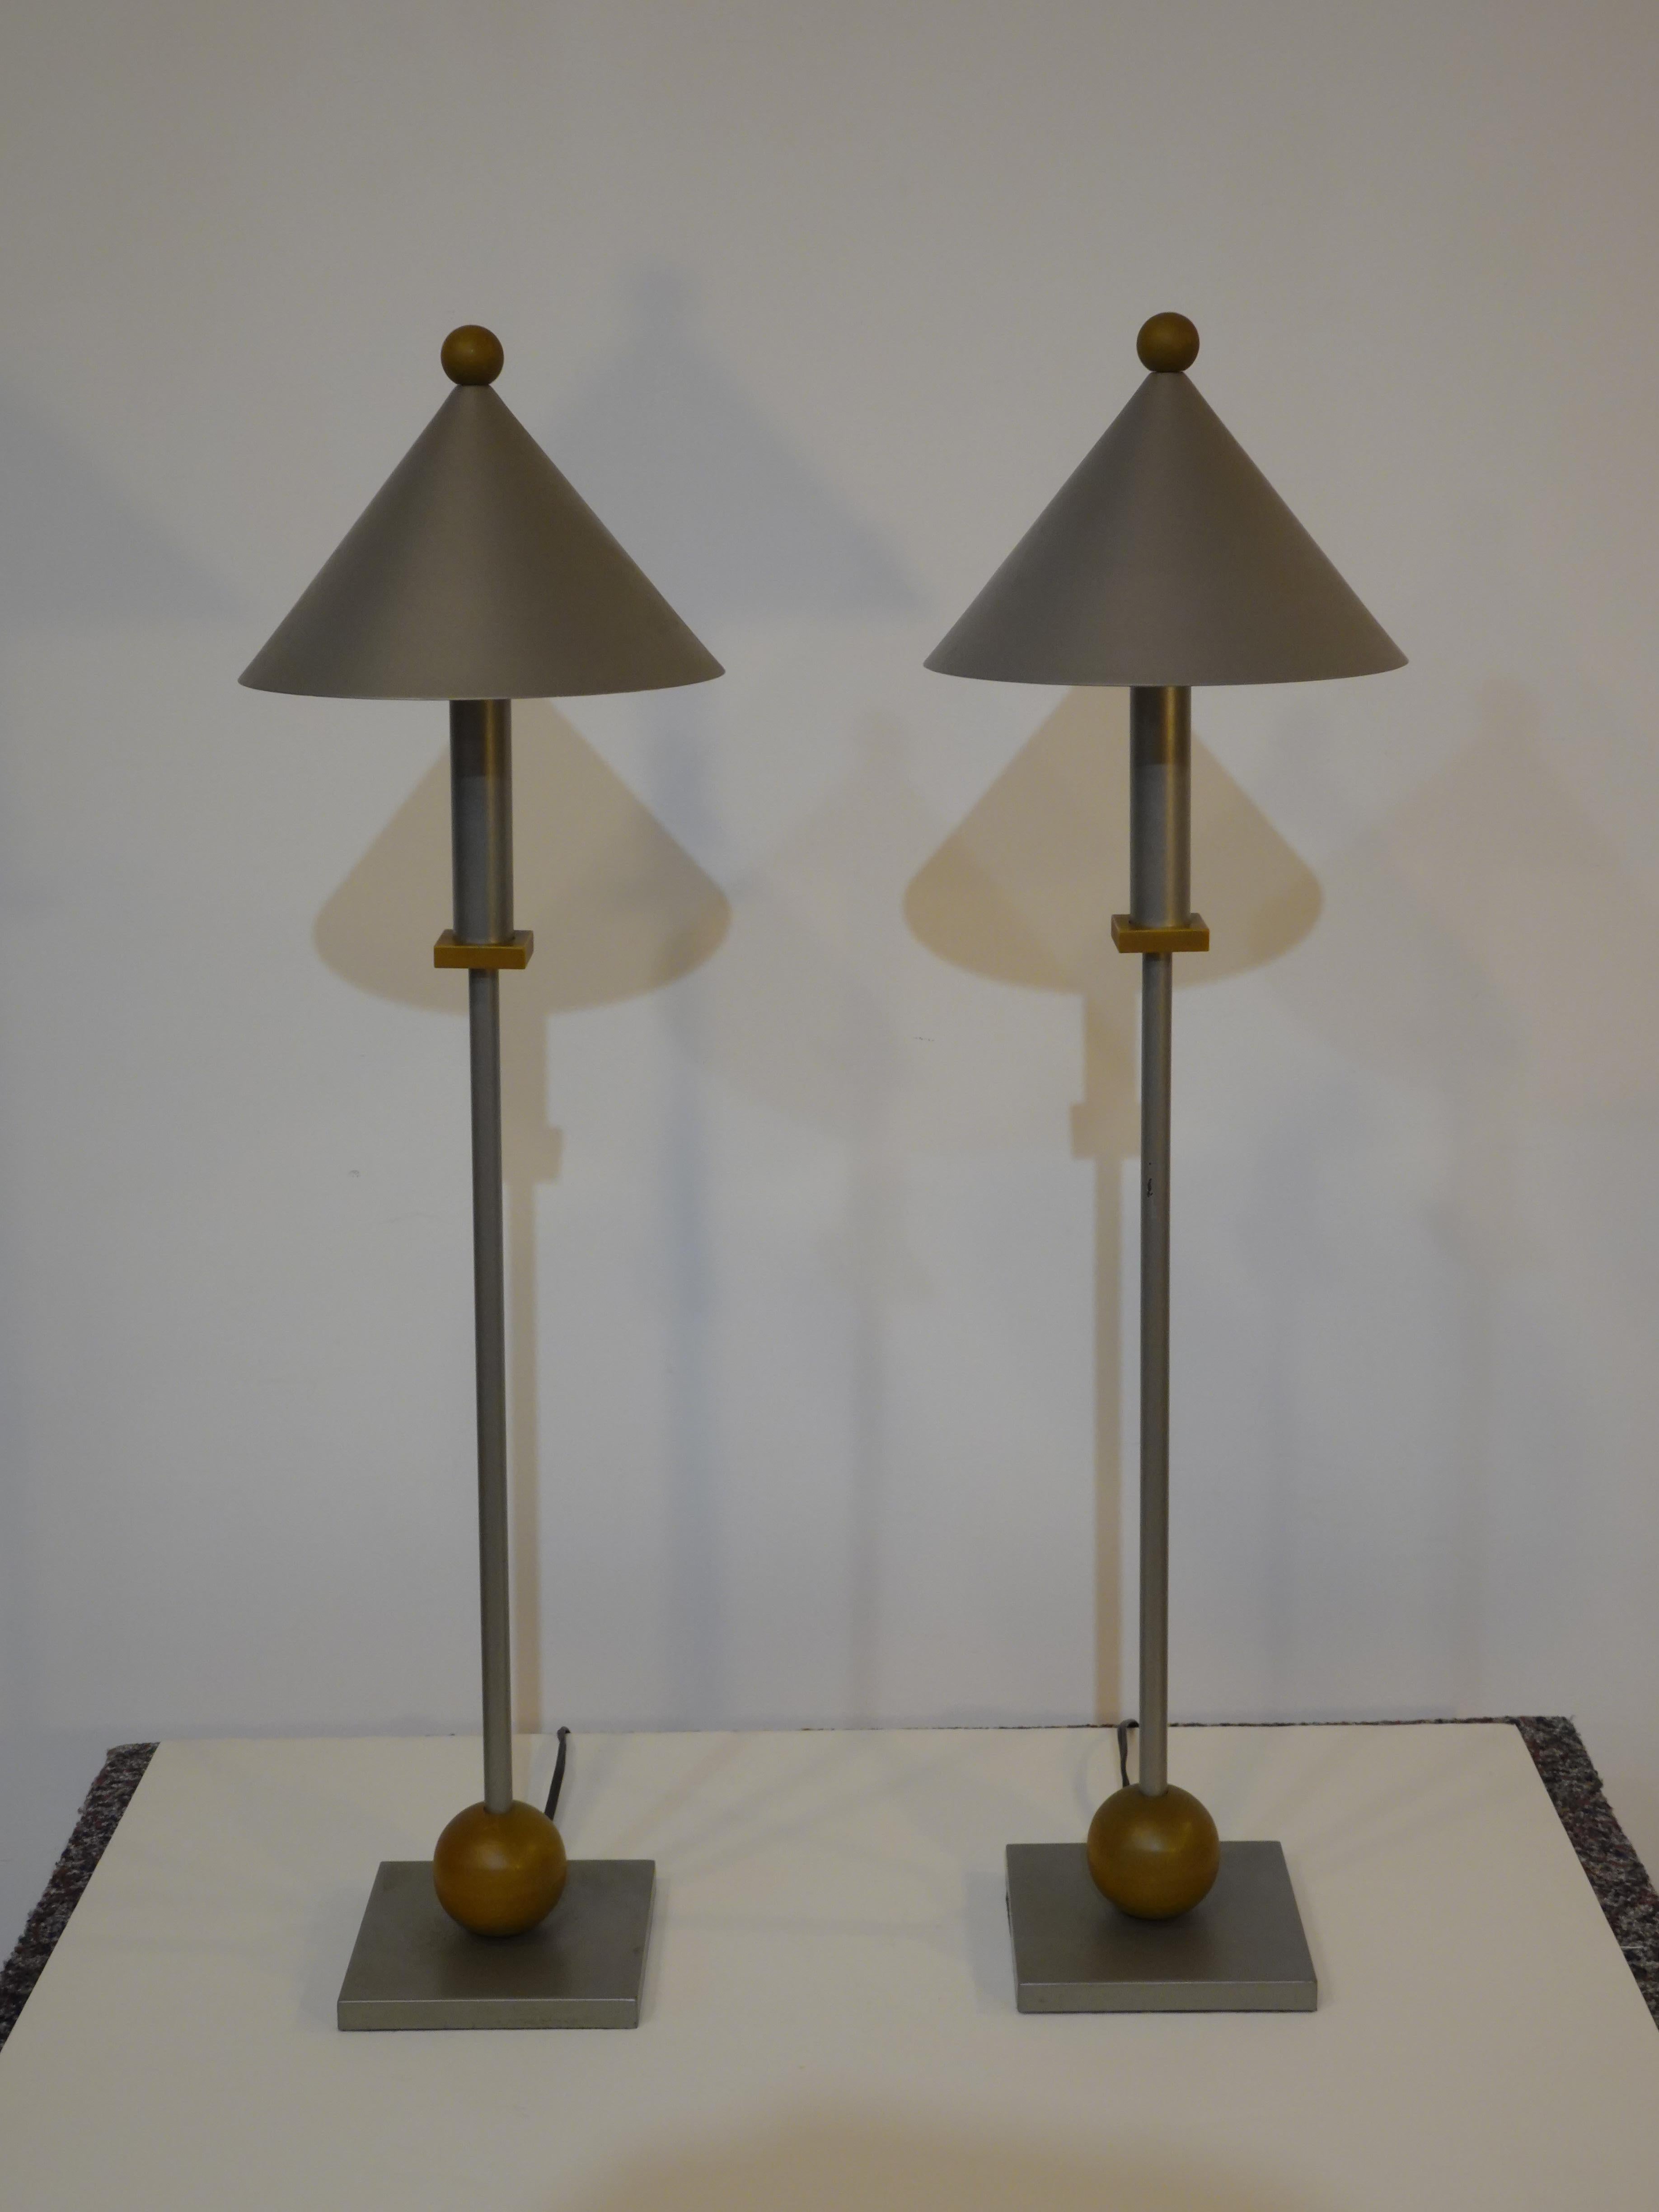 A pair of pewter toned metal table lamps with coned shades topped with patinaed brass finals matching the ball to the base and middle detail piece. Inside the shade is a frosted glass defuser so the light is a bit softer and even with a in line on